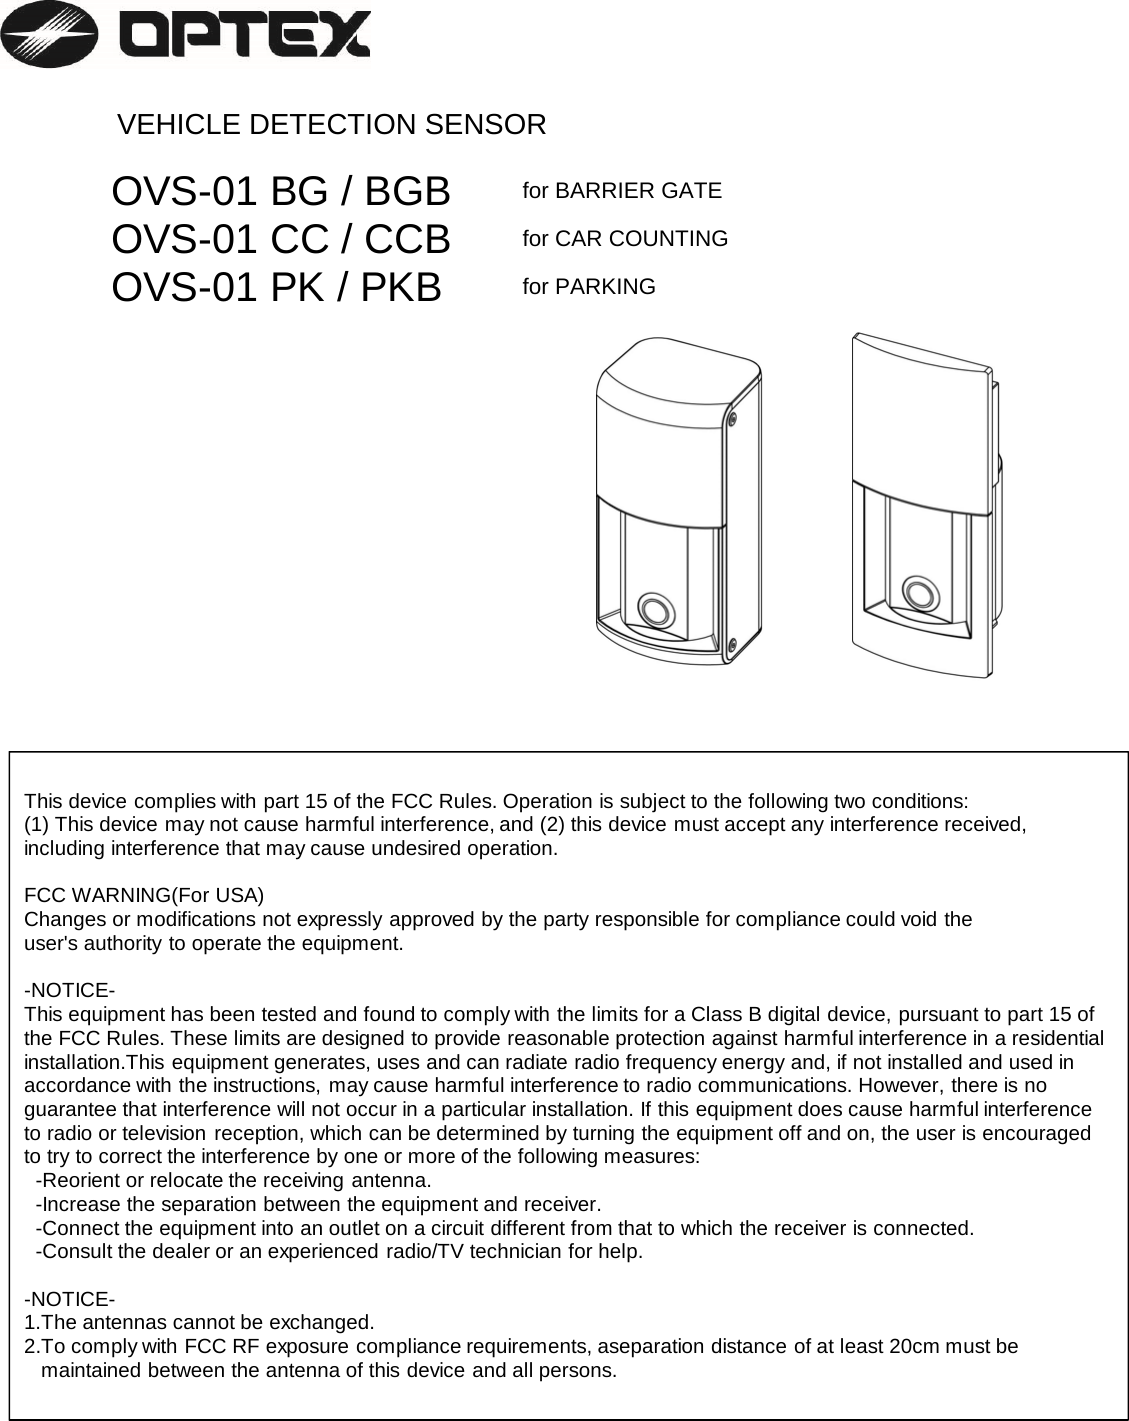  VEHICLE DETECTION SENSOROVS-01 BG / BGB for BARRIER GATEOVS-01 CC / CCB for CAR COUNTINGOVS-01 PK / PKB for PARKINGThis device complies with part 15 of the FCC Rules. Operation is subject to the following two conditions: (1) This device may not cause harmful interference, and (2) this device must accept any interference received, including interference that may cause undesired operation.FCC WARNING(For USA)Changes or modifications not expressly approved by the party responsible for compliance could void the user&apos;s authority to operate the equipment.-NOTICE-This equipment has been tested and found to comply with the limits for a Class B digital device, pursuant to part 15 ofthe FCC Rules. These limits are designed to provide reasonable protection against harmful interference in a residentialinstallation.This equipment generates, uses and can radiate radio frequency energy and, if not installed and used in accordance with the instructions, may cause harmful interference to radio communications. However, there is no guarantee that interference will not occur in a particular installation. If this equipment does cause harmful interferenceto radio or television reception, which can be determined by turning the equipment off and on, the user is encouraged to try to correct the interference by one or more of the following measures: -Reorient or relocate the receiving antenna.-Increase the separation between the equipment and receiver.-Connect the equipment into an outlet on a circuit different from that to which the receiver is connected.-Consult the dealer or an experienced radio/TV technician for help. -NOTICE-1.The antennas cannot be exchanged.2.To comply with FCC RF exposure compliance requirements, aseparation distance of at least 20cm must be maintained between the antenna of this device and all persons.